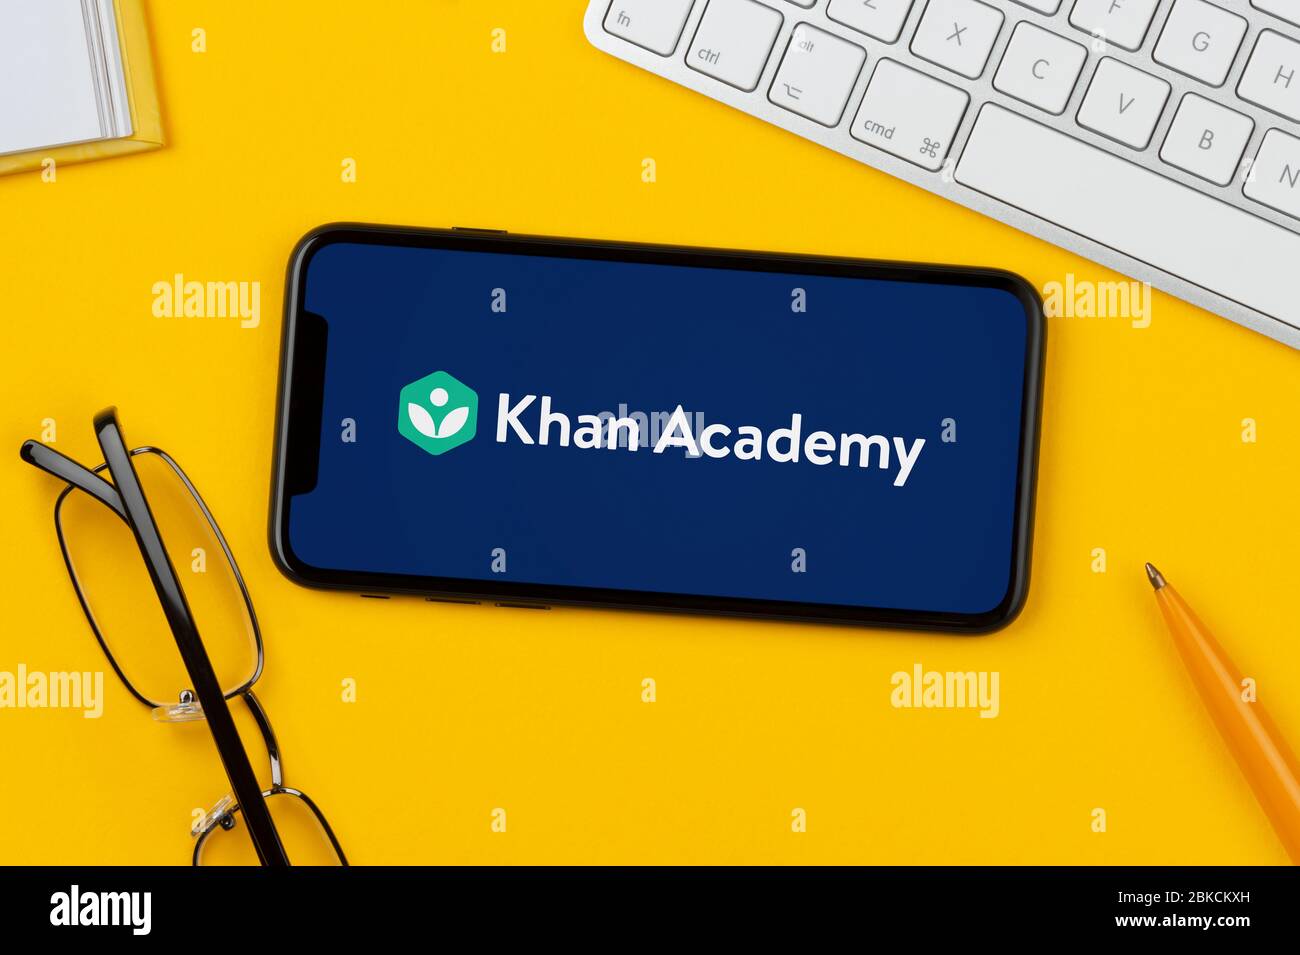 A smartphone showing the Khan Academy logo rests on a yellow background along with a keyboard, glasses, pen and book (Editorial use only). Stock Photo